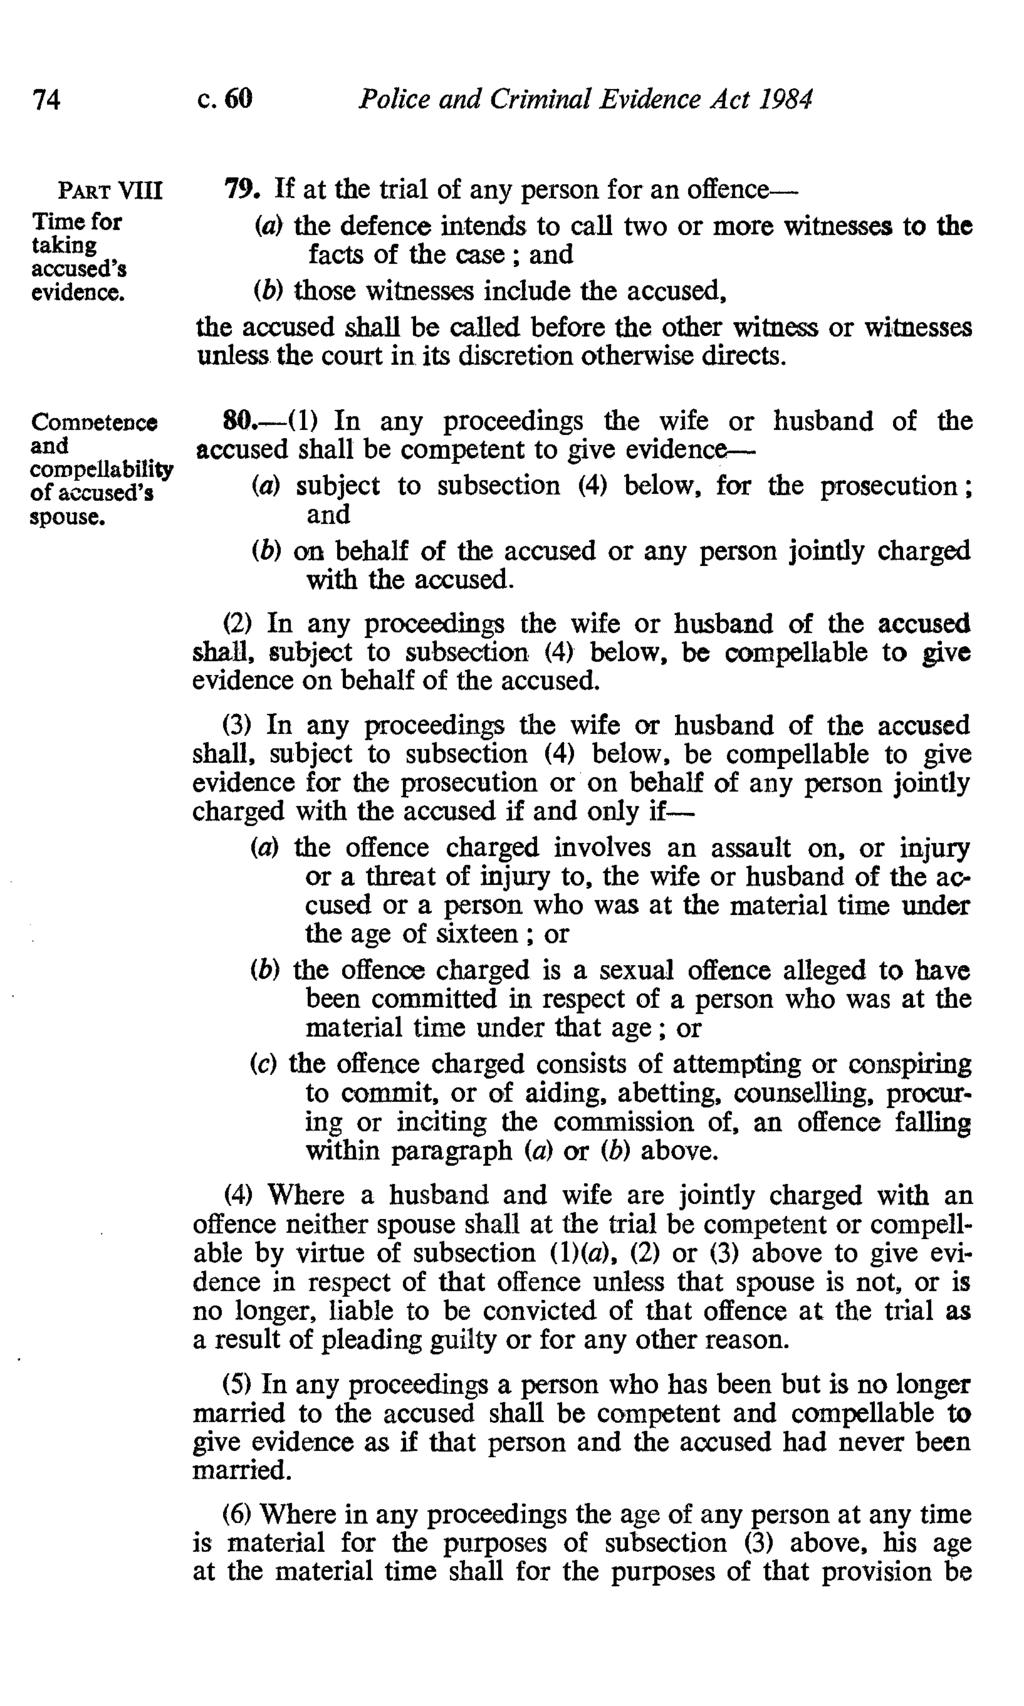 74 c. 60 Police and Criminal Evidence Act 1984 PART VIII Time for taking accused's evidence. 79.